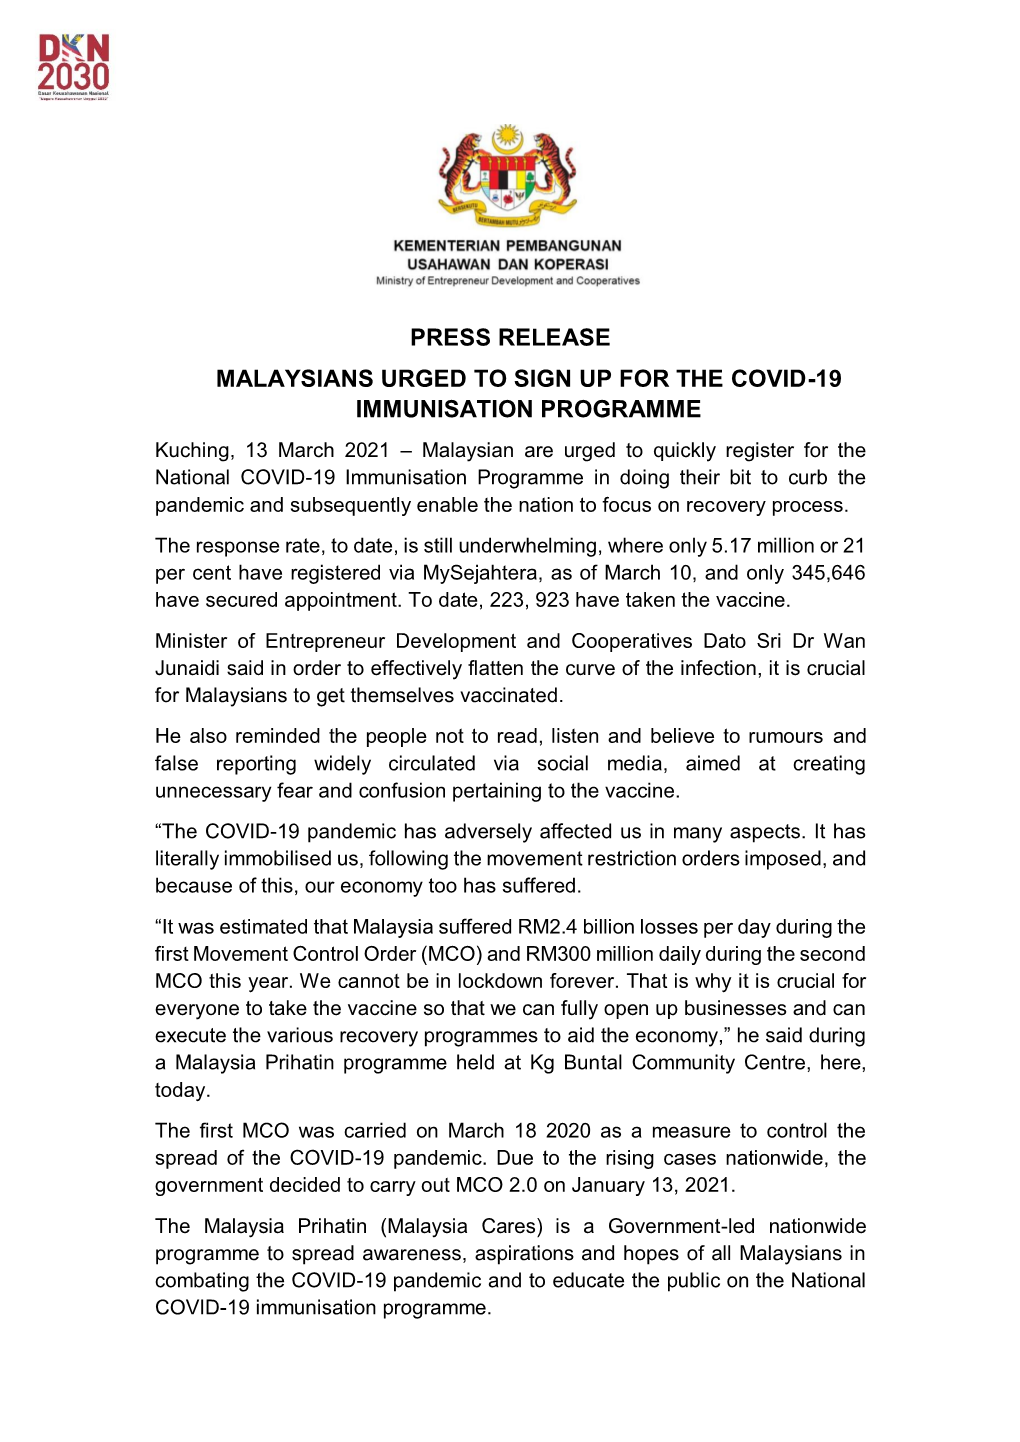 Press Release Malaysians Urged to Sign up for the Covid-19 Immunisation Programme